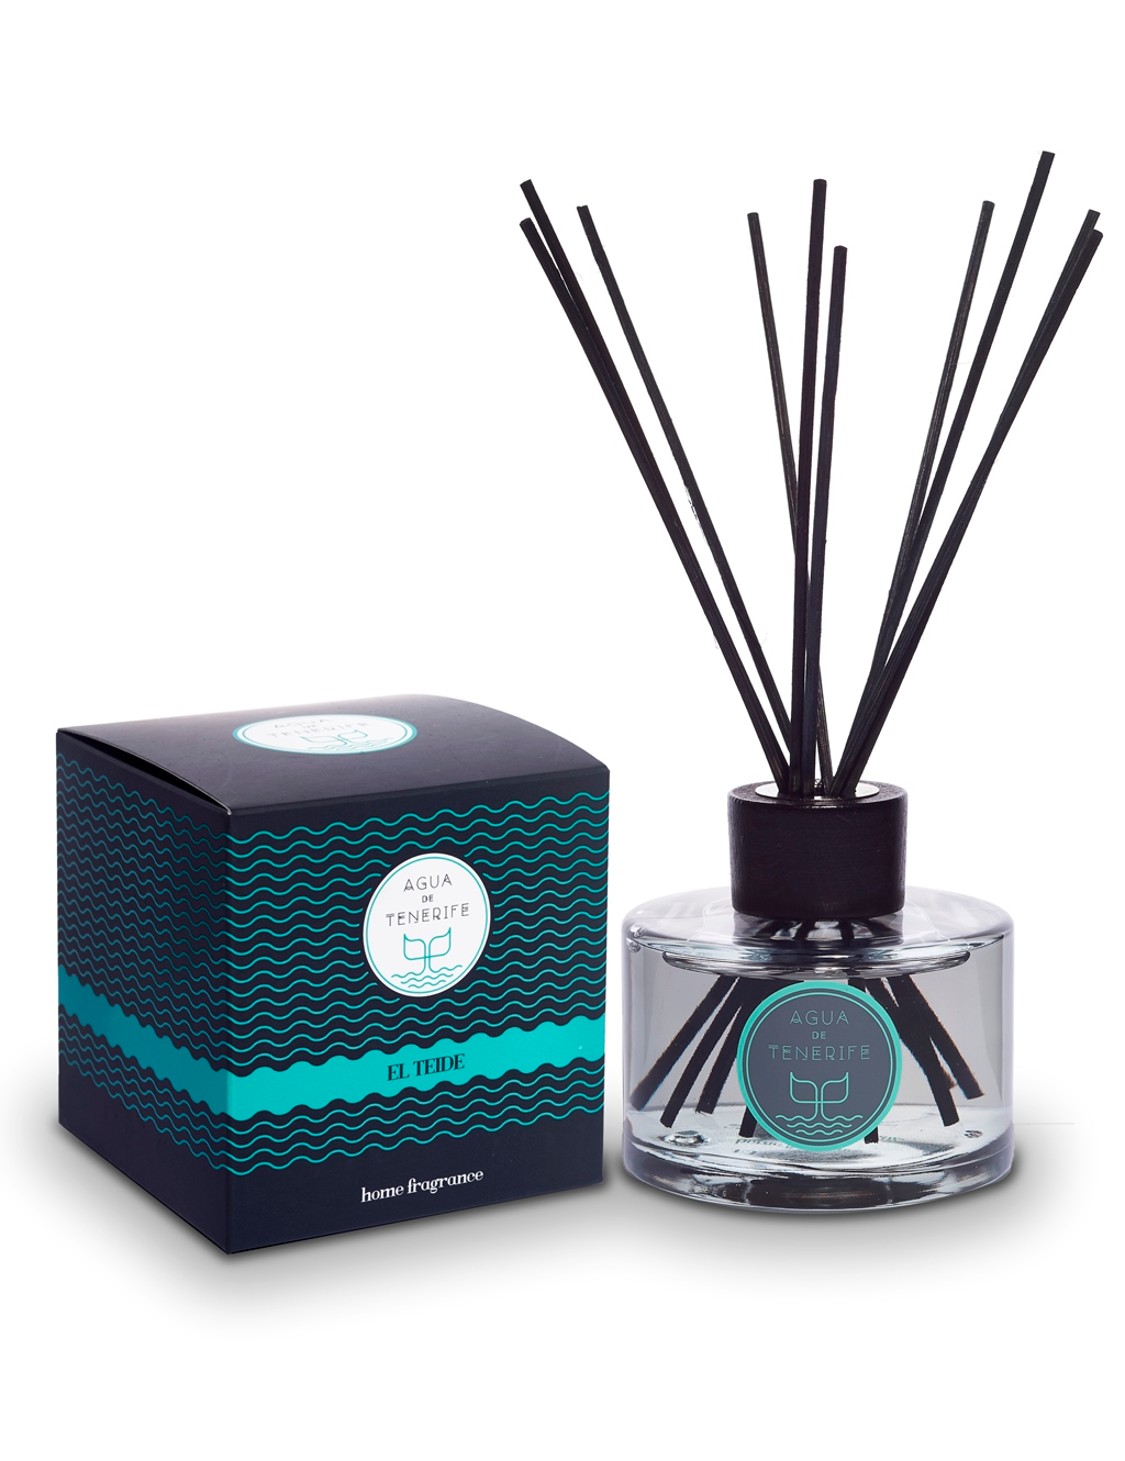 shop Agua de Tenerife  EL TEIDE: El Teide Air Freshner 250 ml.
The fragrance is inspired by the dominant volcano on the island, wrapped in a cocoon of essences ideal for people who love refi ned and harmony filled environments. number 34